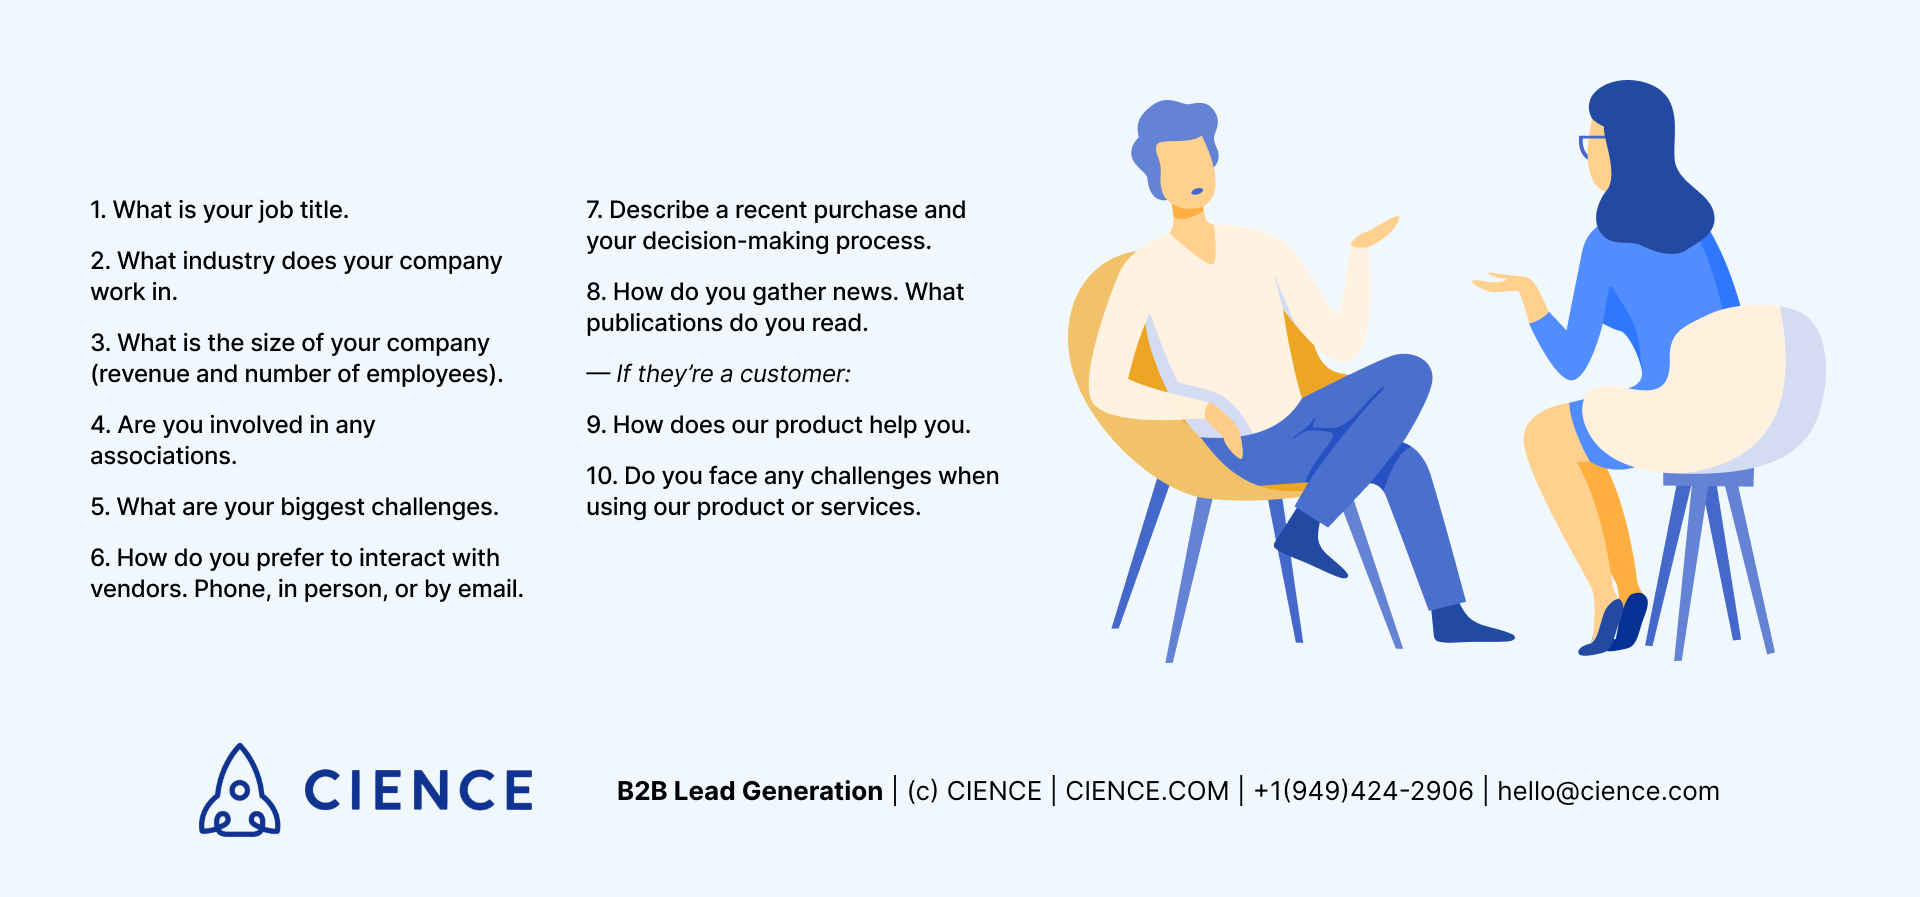 10 Best Qestions to Ask to Build an Ideal Customer Profile